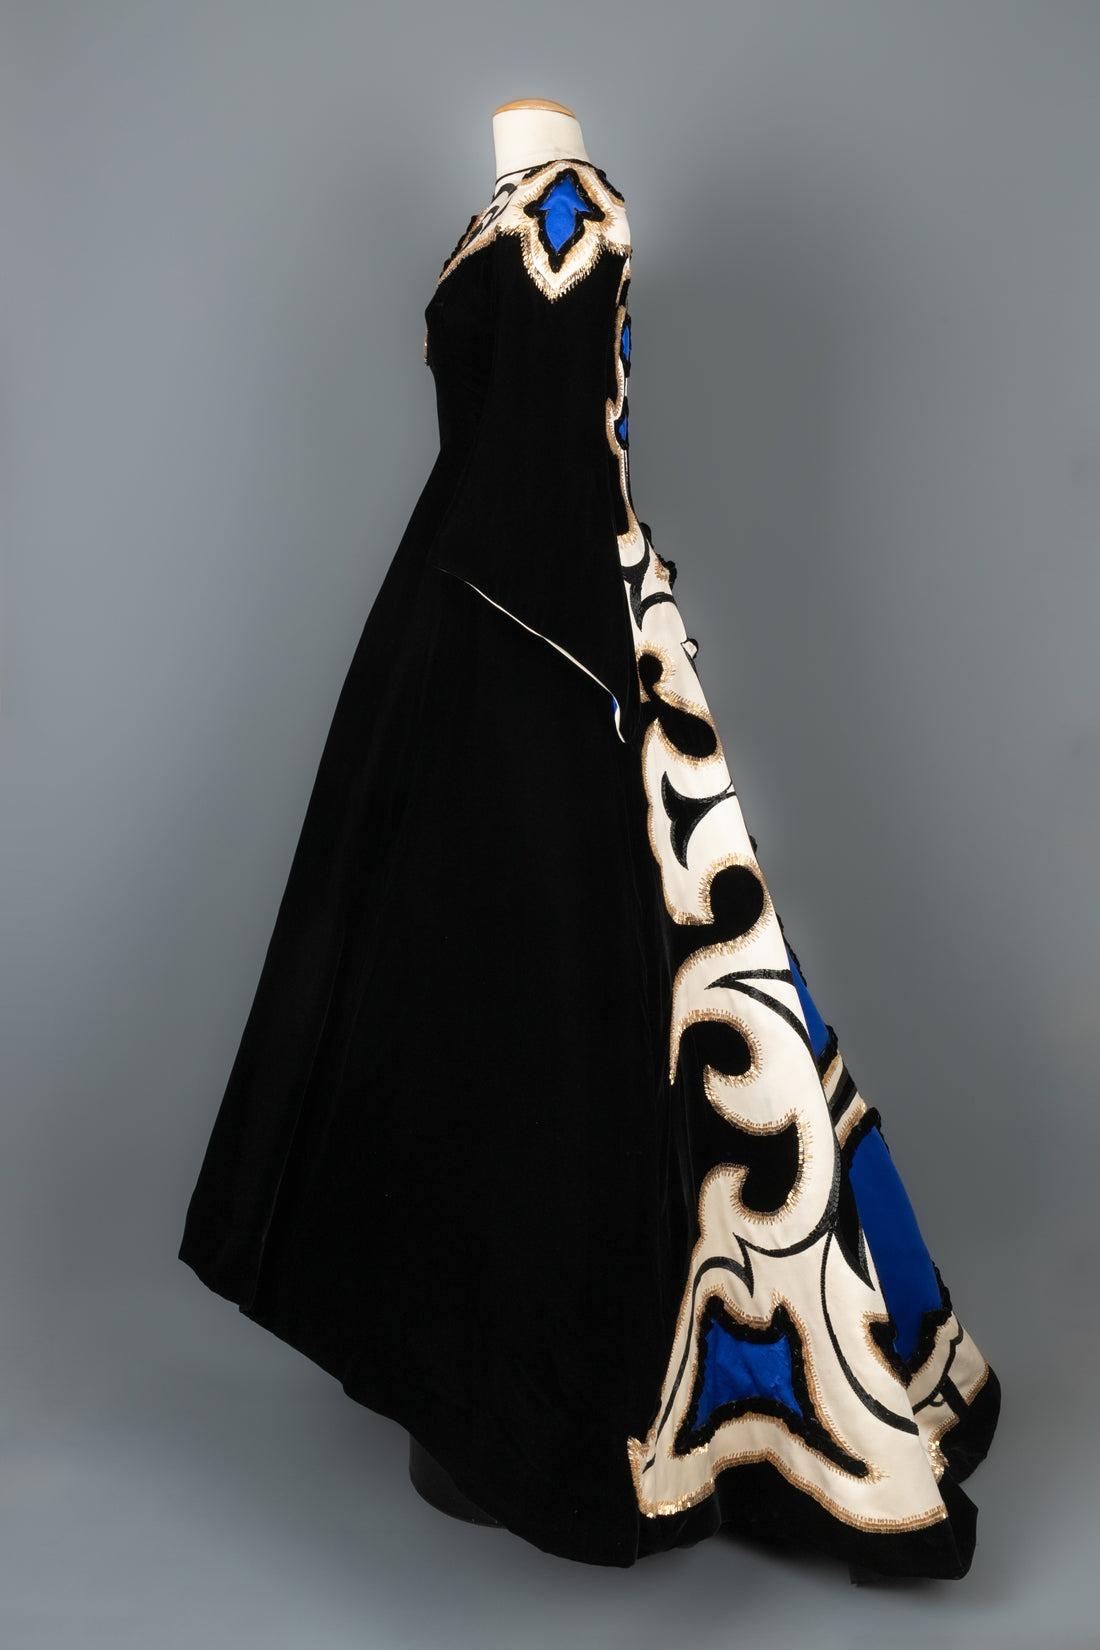 Balmain - (Made in France) Haute Couture maxi evening dress with a black velvet train aplicated with cream and blue satin. It is embroidered with black and golden tube pearls and velvet. The slipdress with boning has multiple tulle flounces. No size